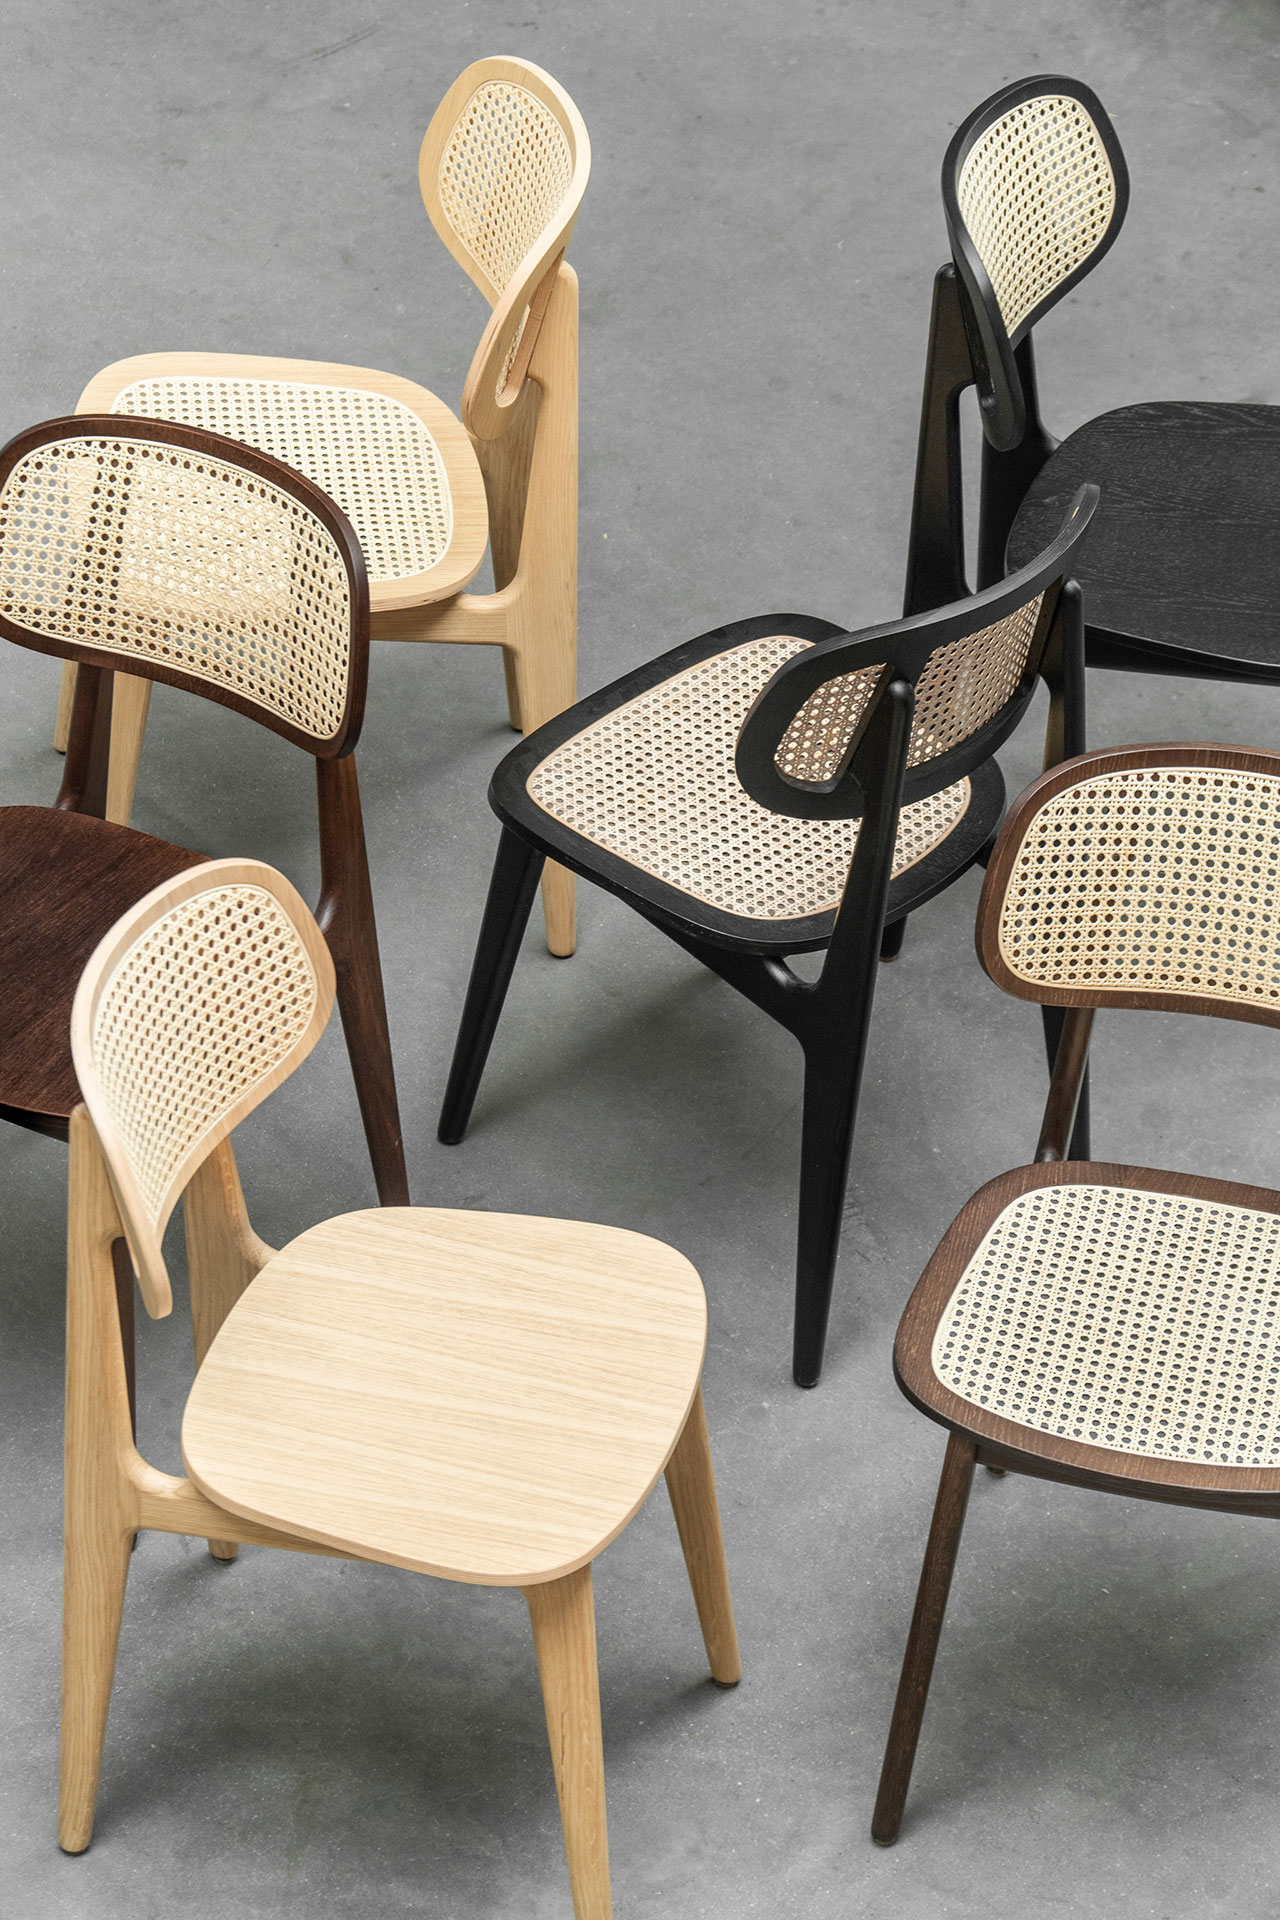 TITUS Dining Chair (Cane Seat)